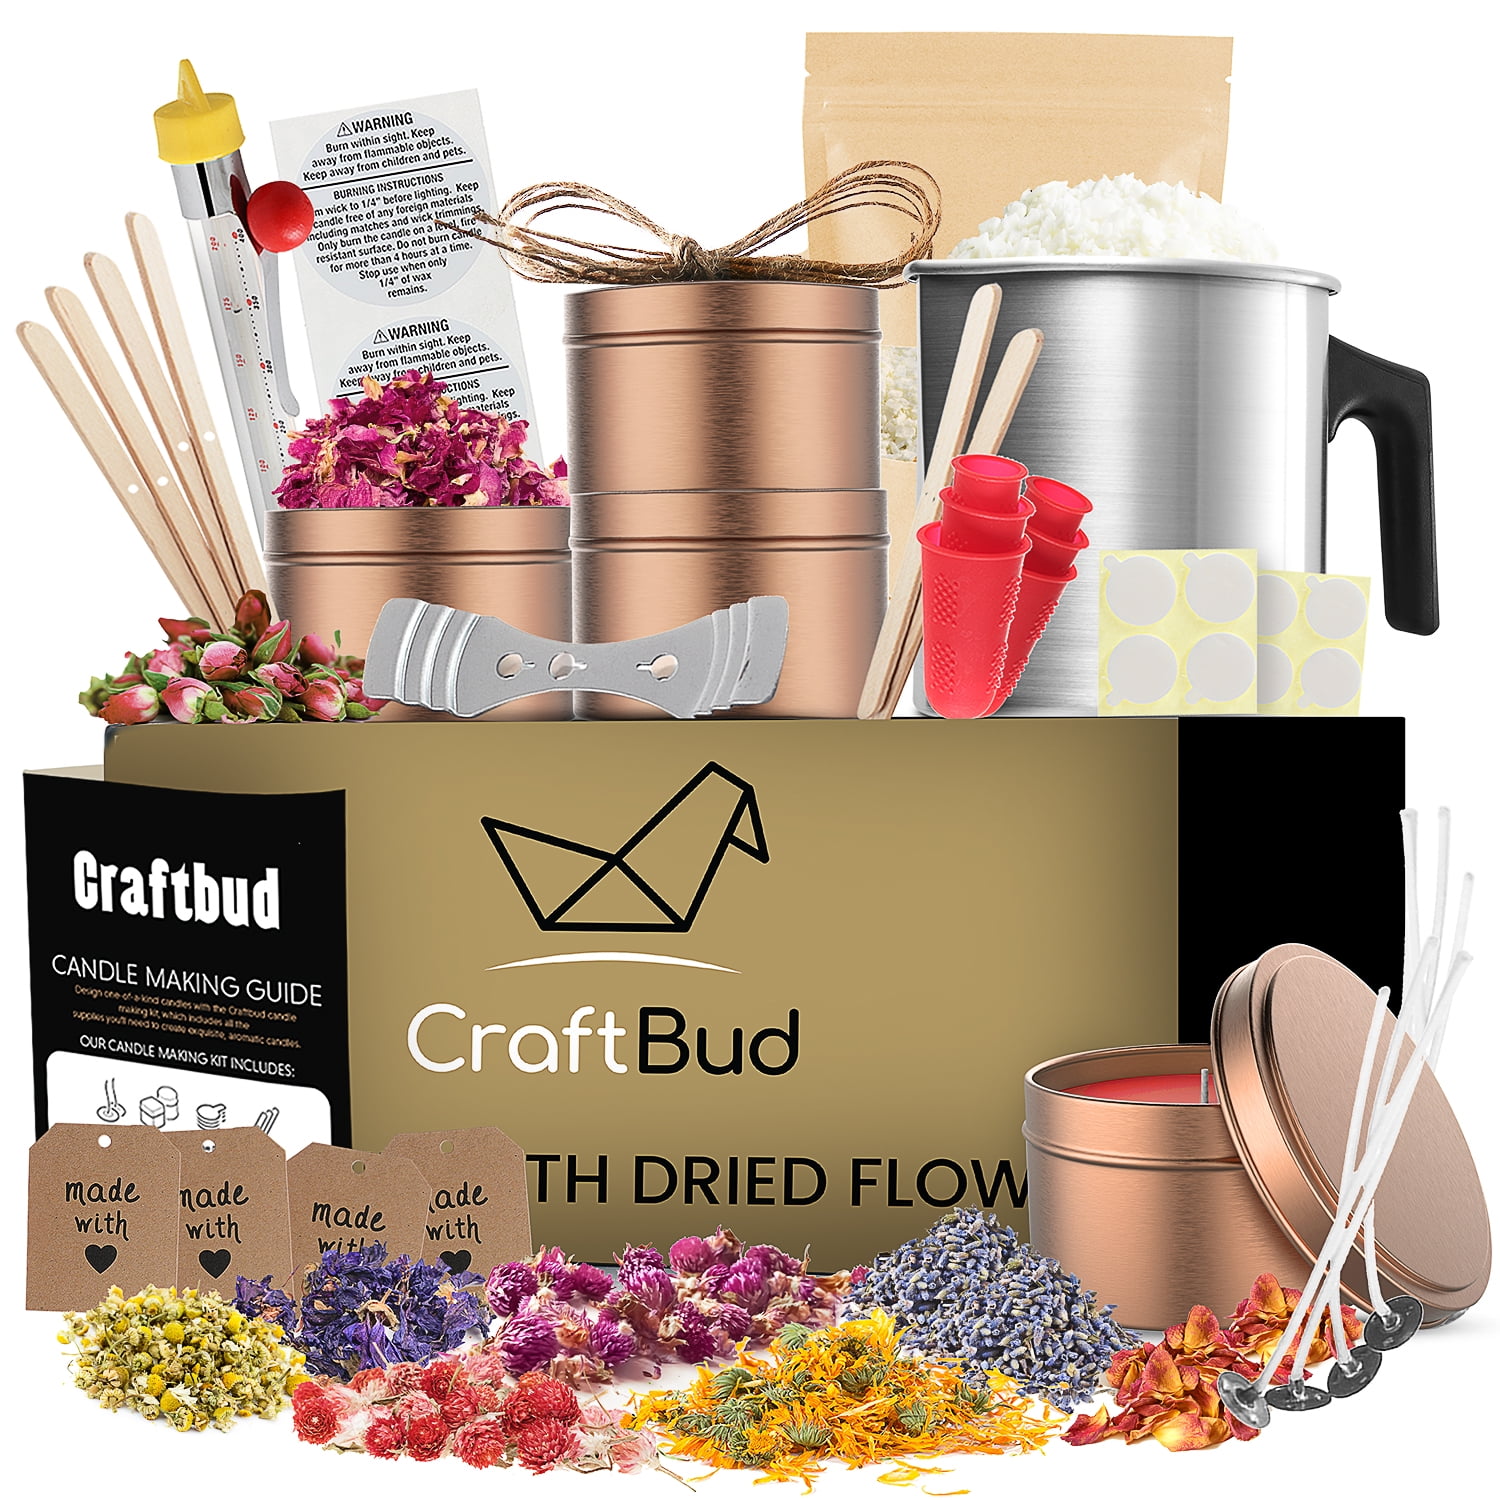 Craftbud Complete Diy Soy Candle Making Kit With Scented Dried Flowers Wax For 2lbs Natural Tin Fragrance Oil Cotton Wicks Com